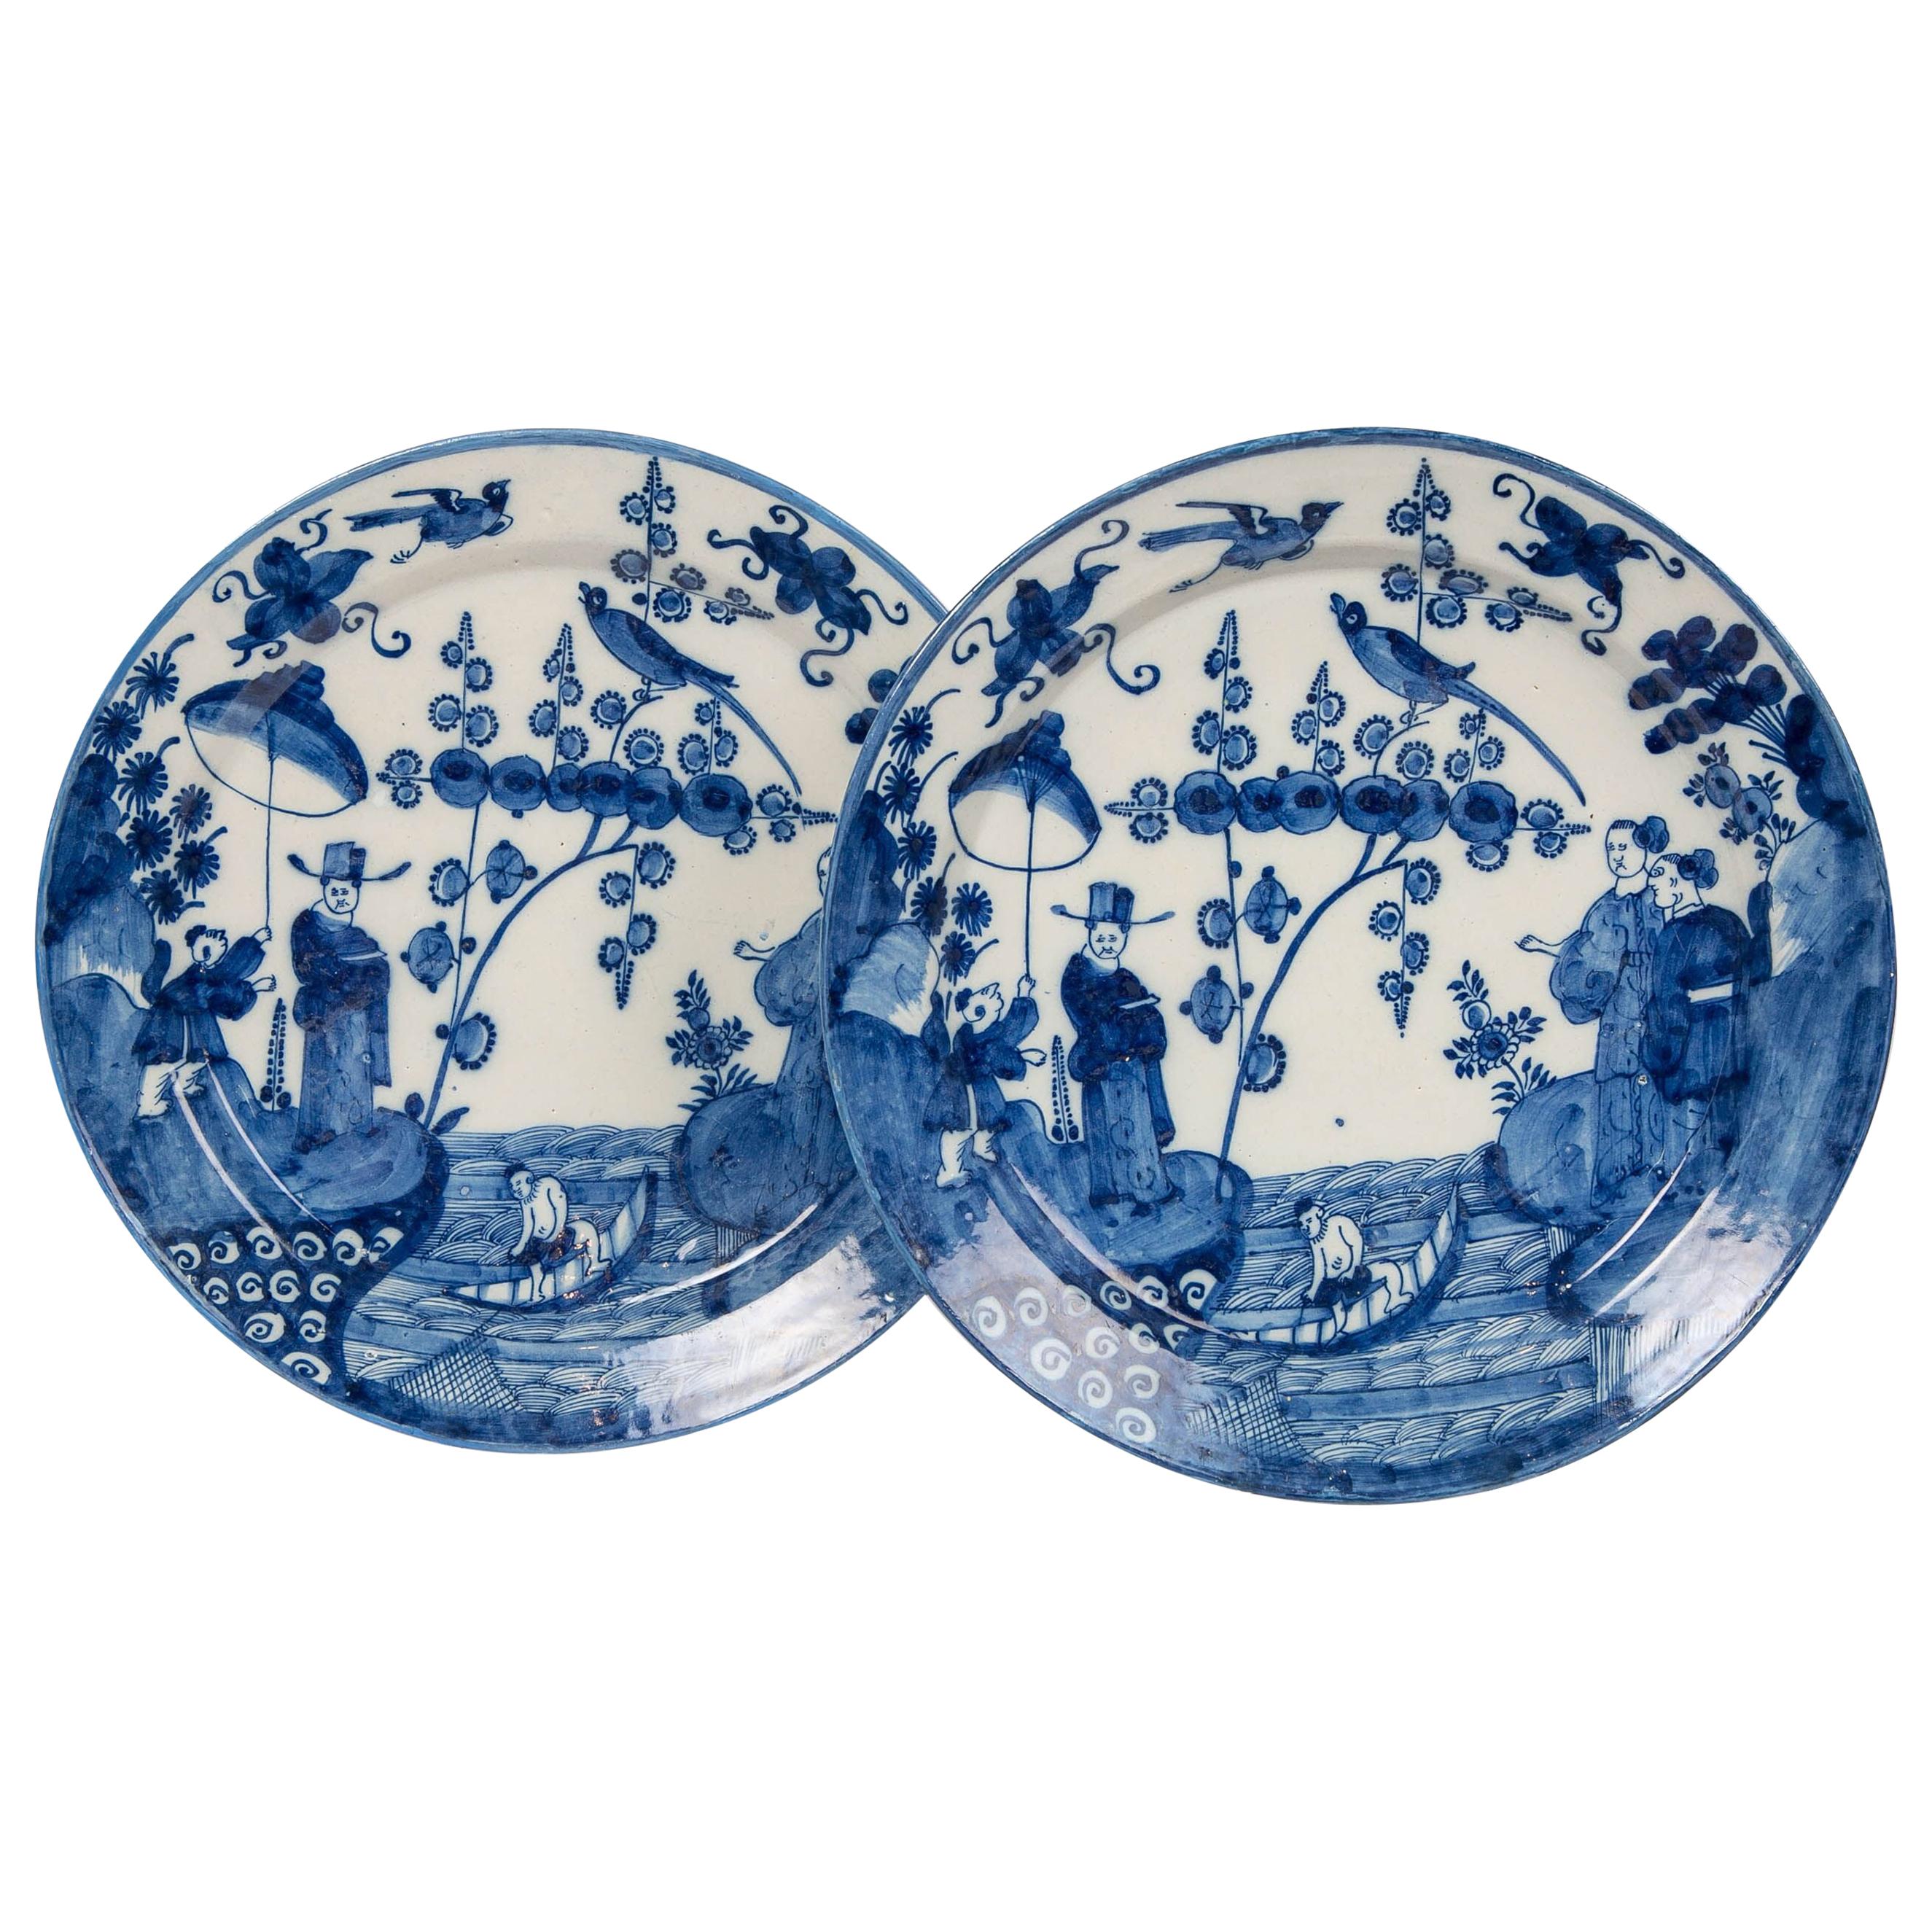 Pair of Antique Delft Chargers with Chinoiserie Scene, Netherlands circa 1693